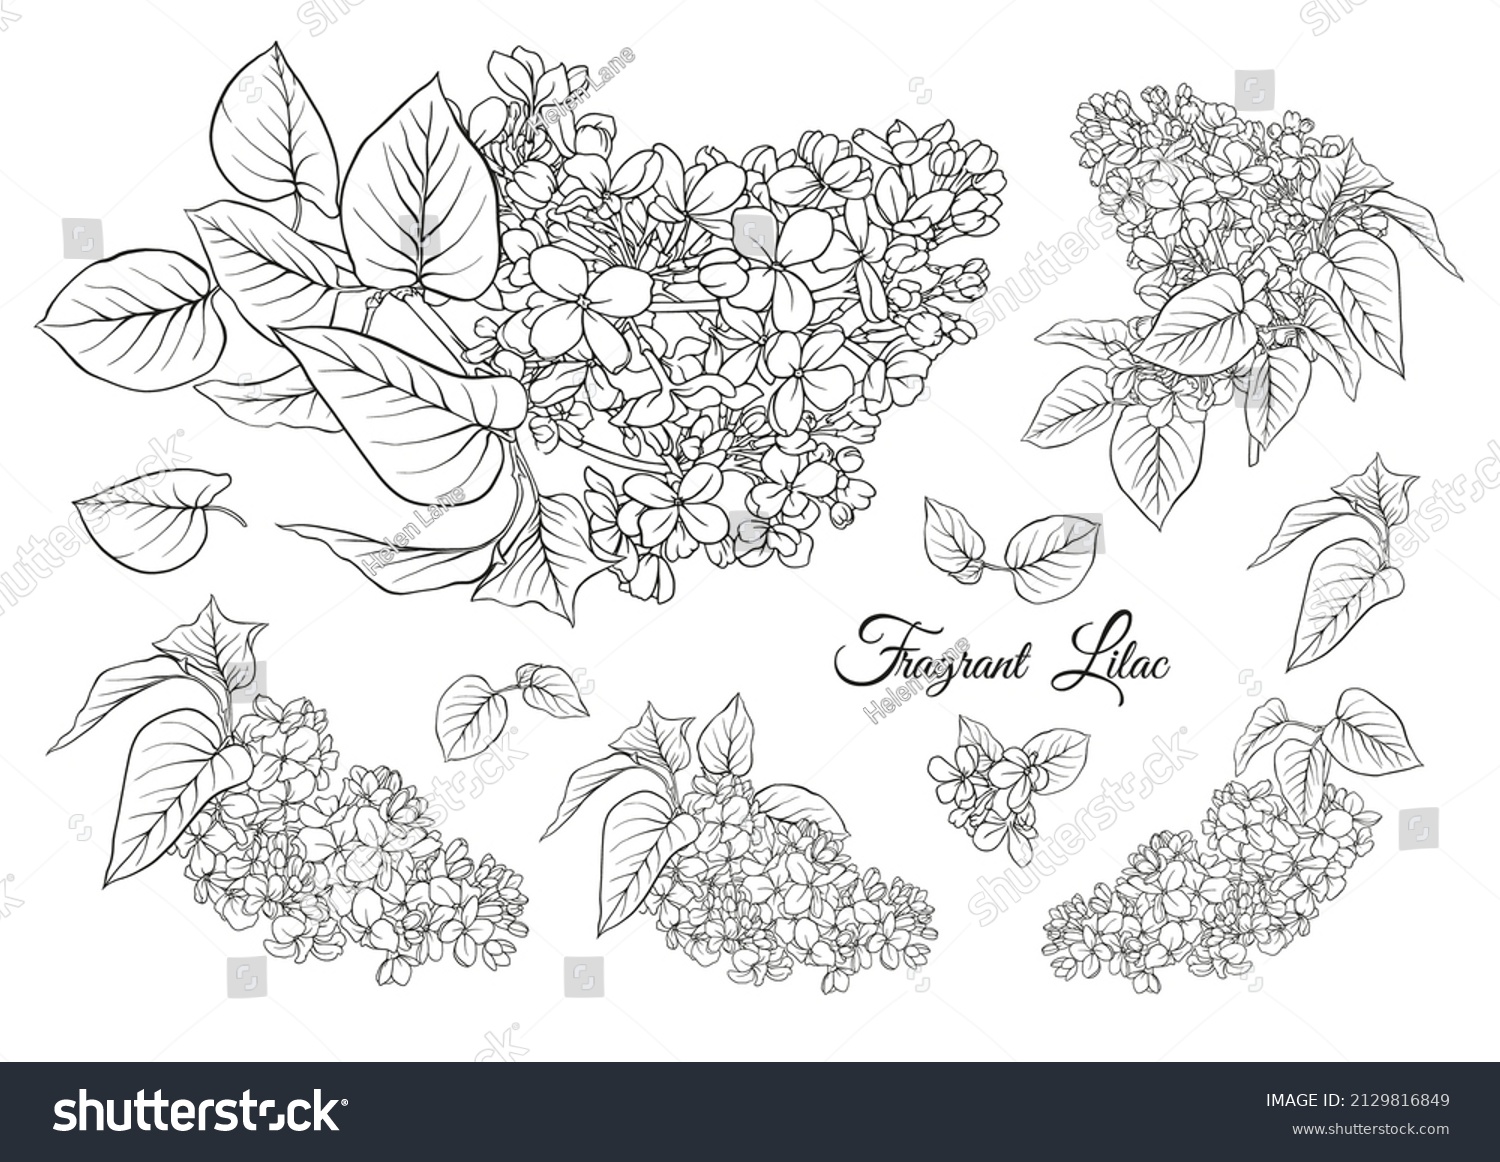 SVG of Lilac flower set in botanical classical drawing. Vector illustration. Isolated on white background. svg